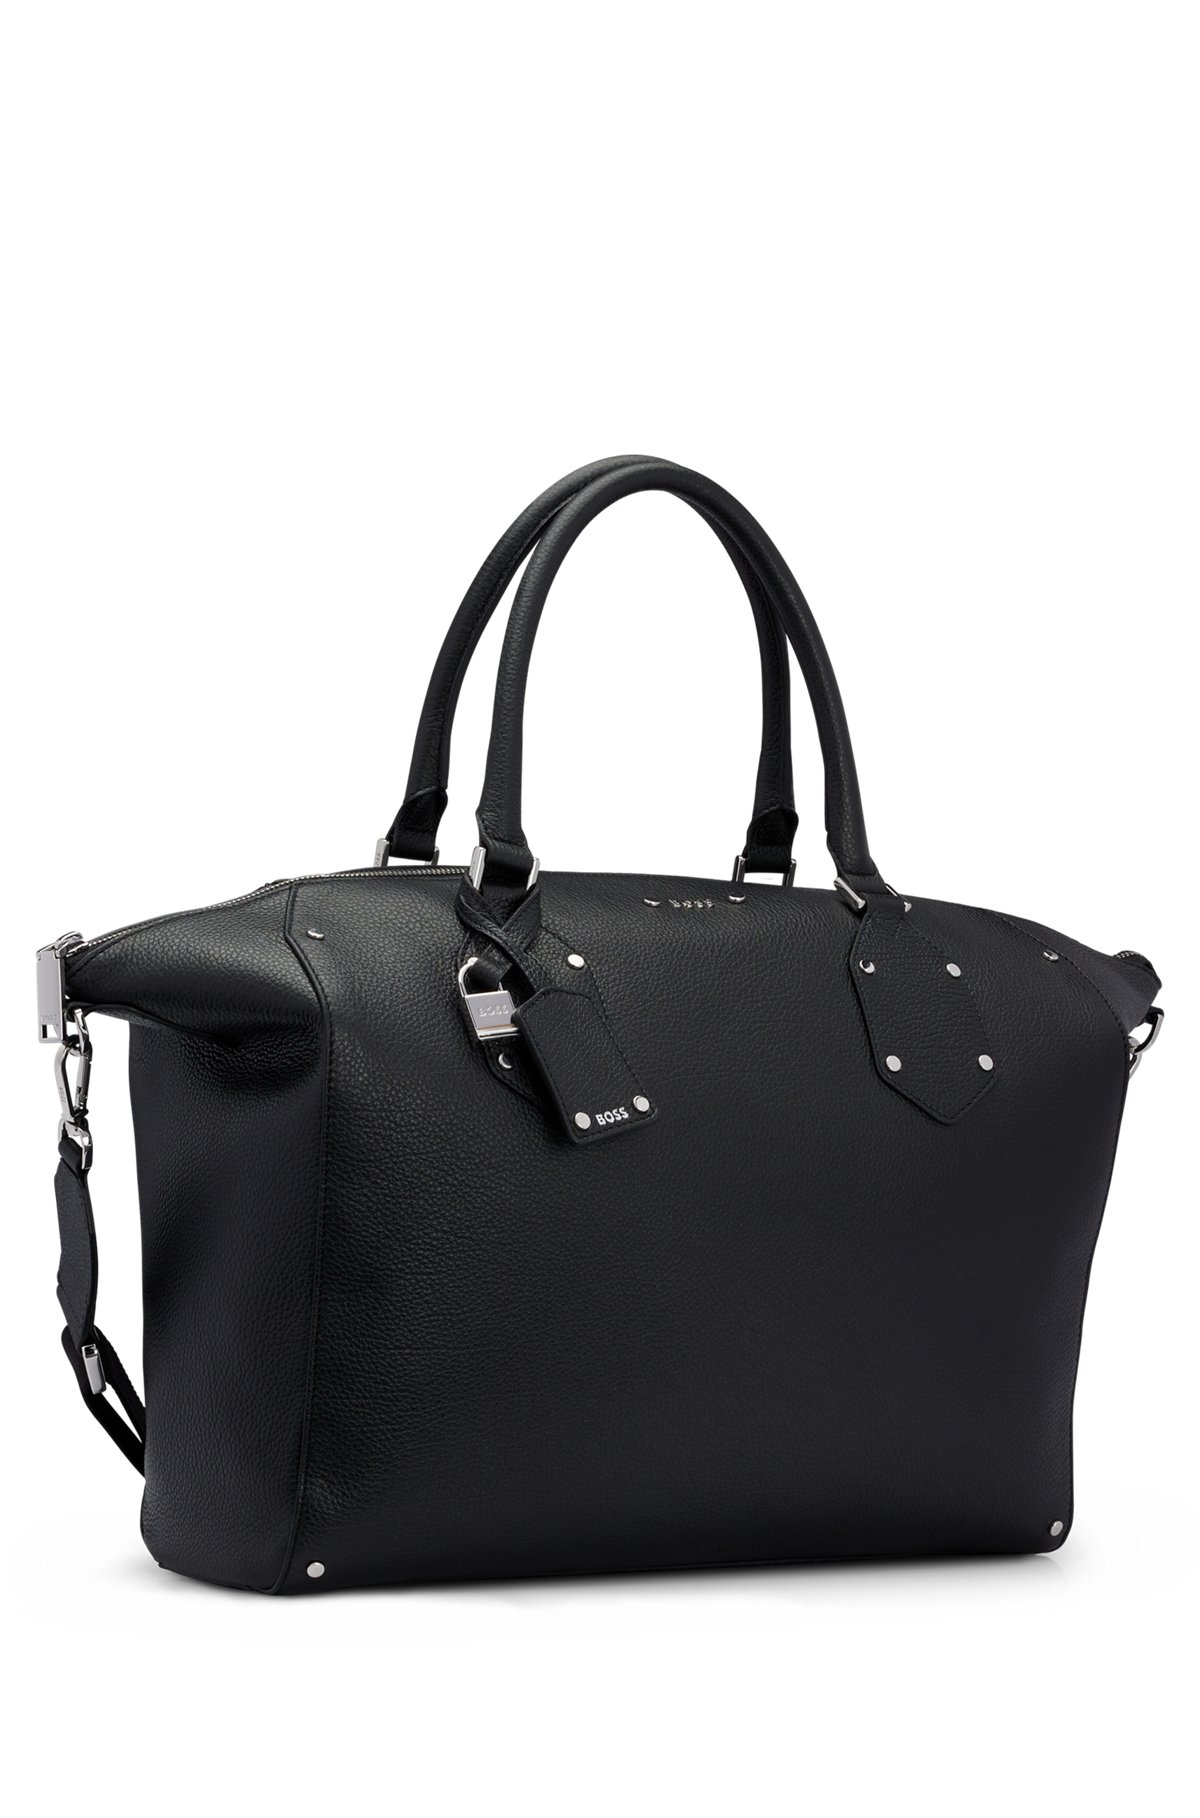 Grained-leather tote bag with logo details, Black